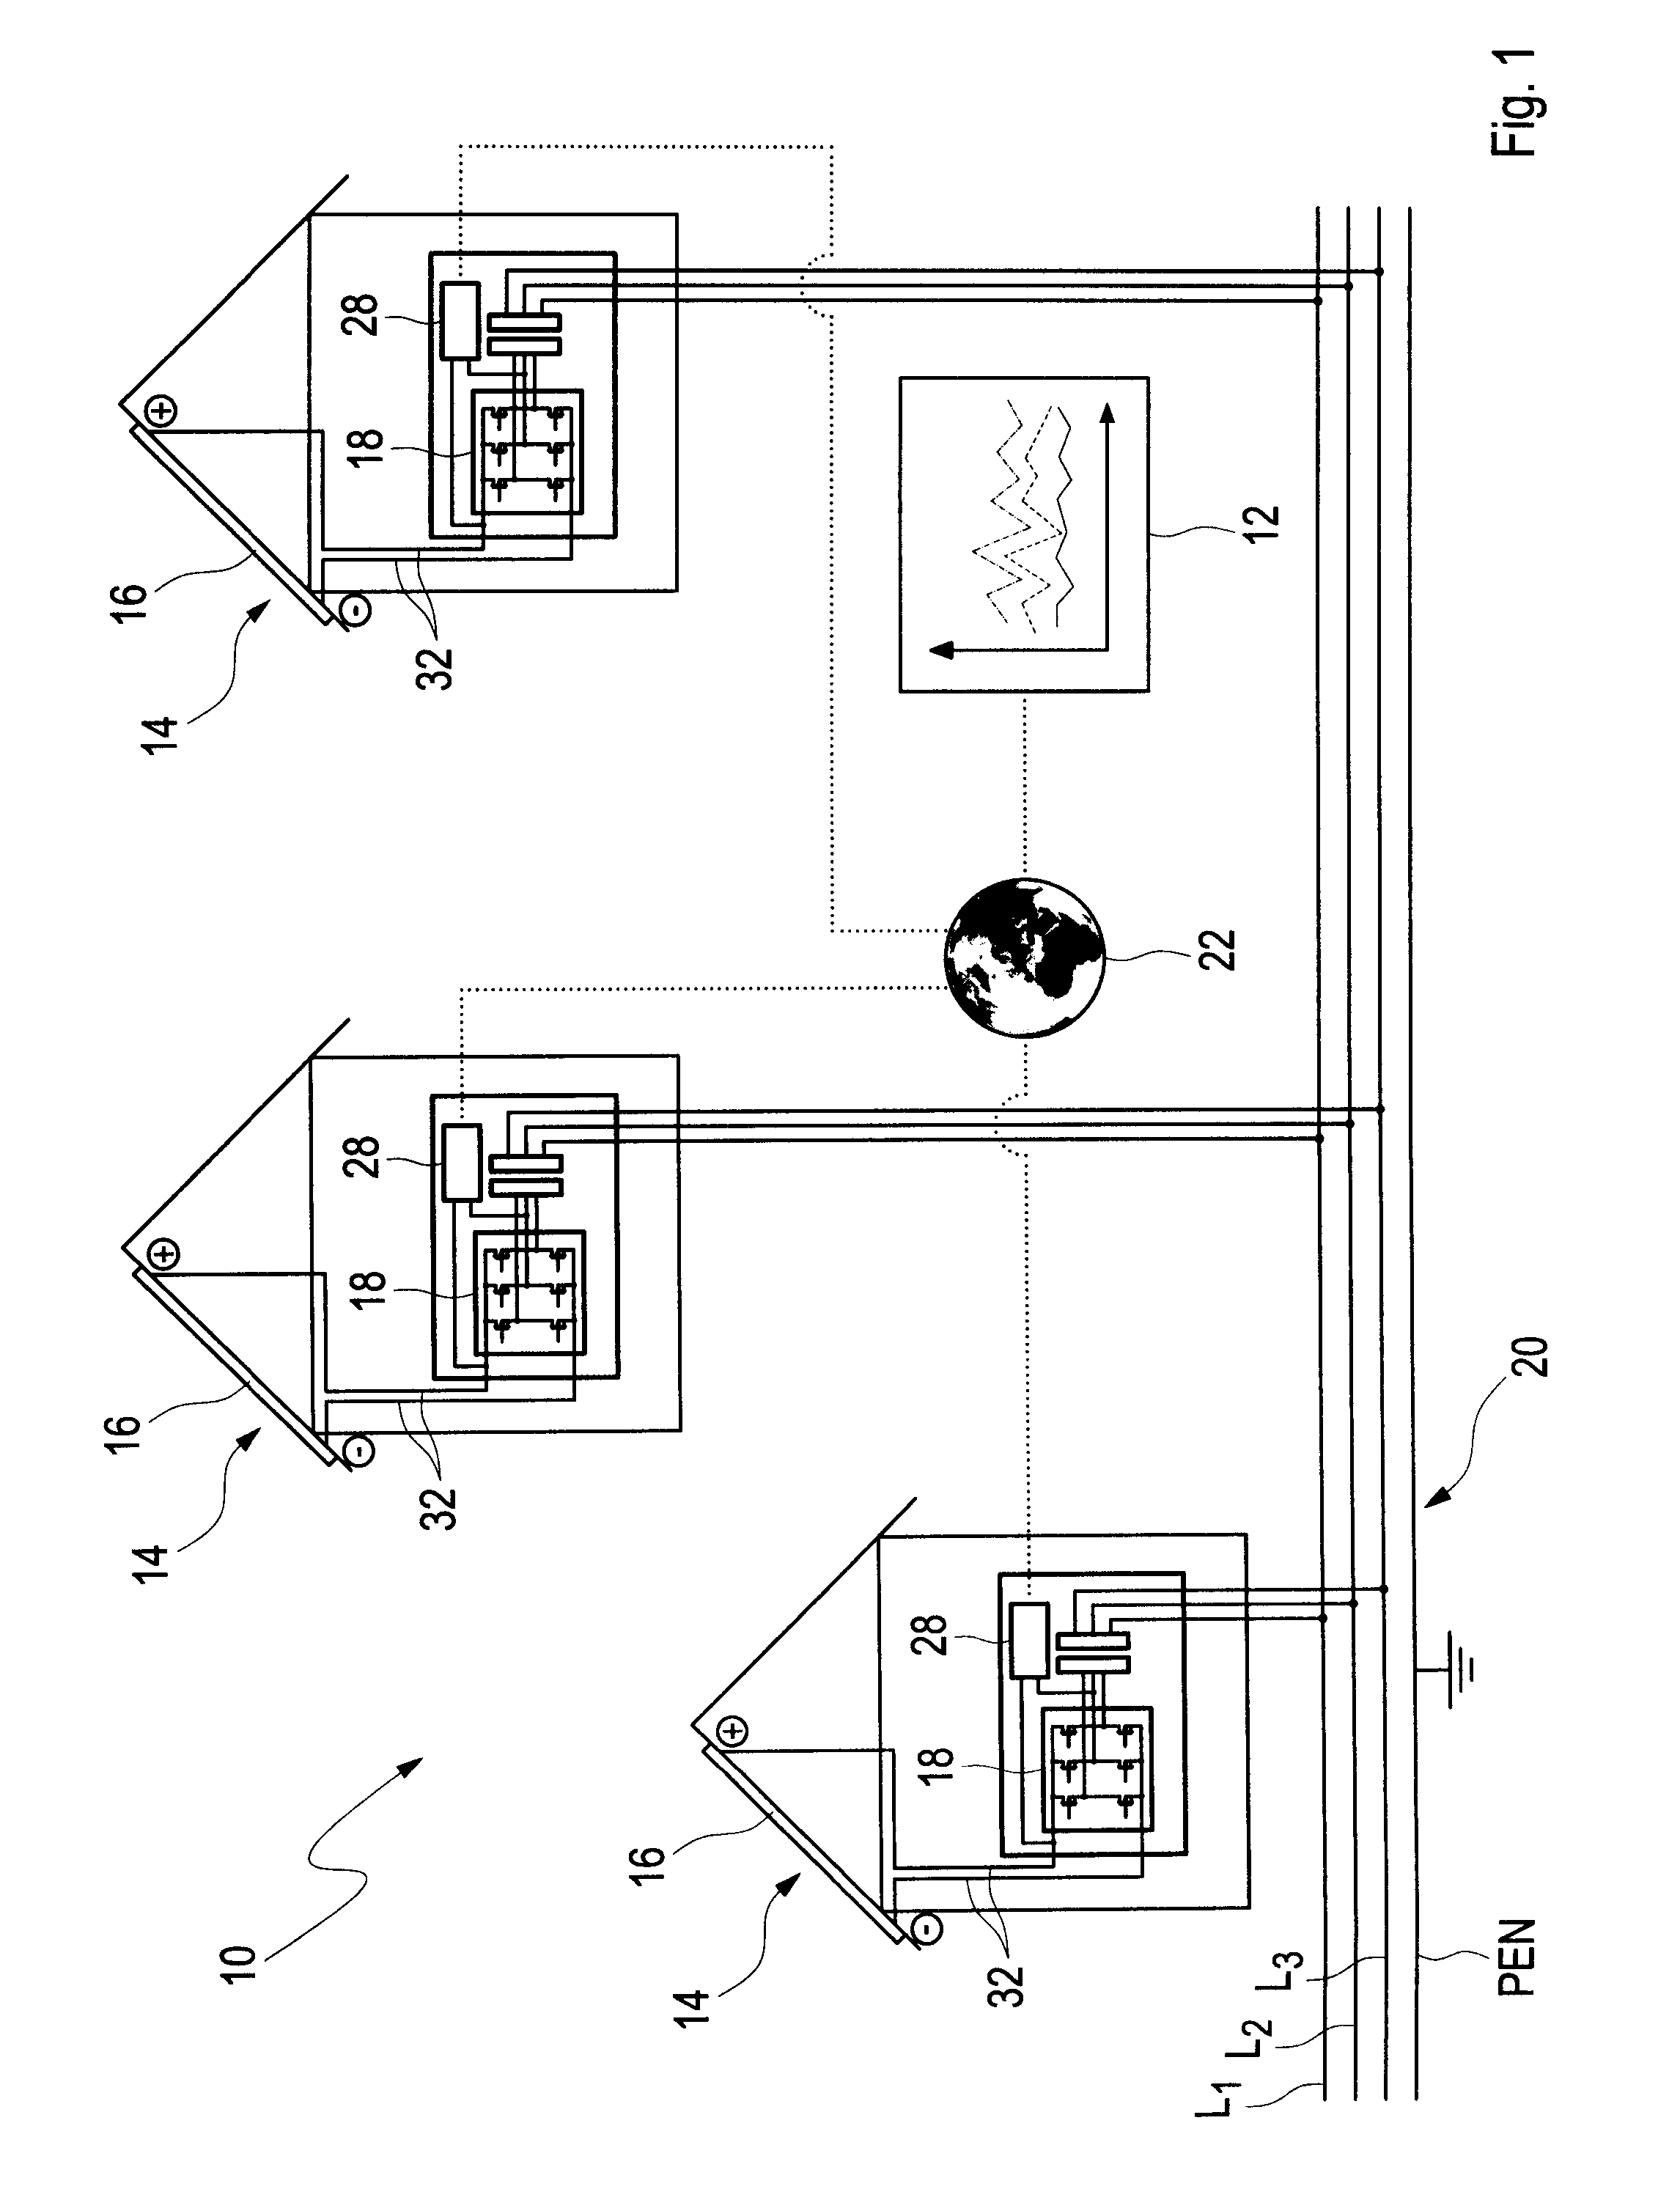 Monitoring System for Power Grid Distributed Power Generation Devices